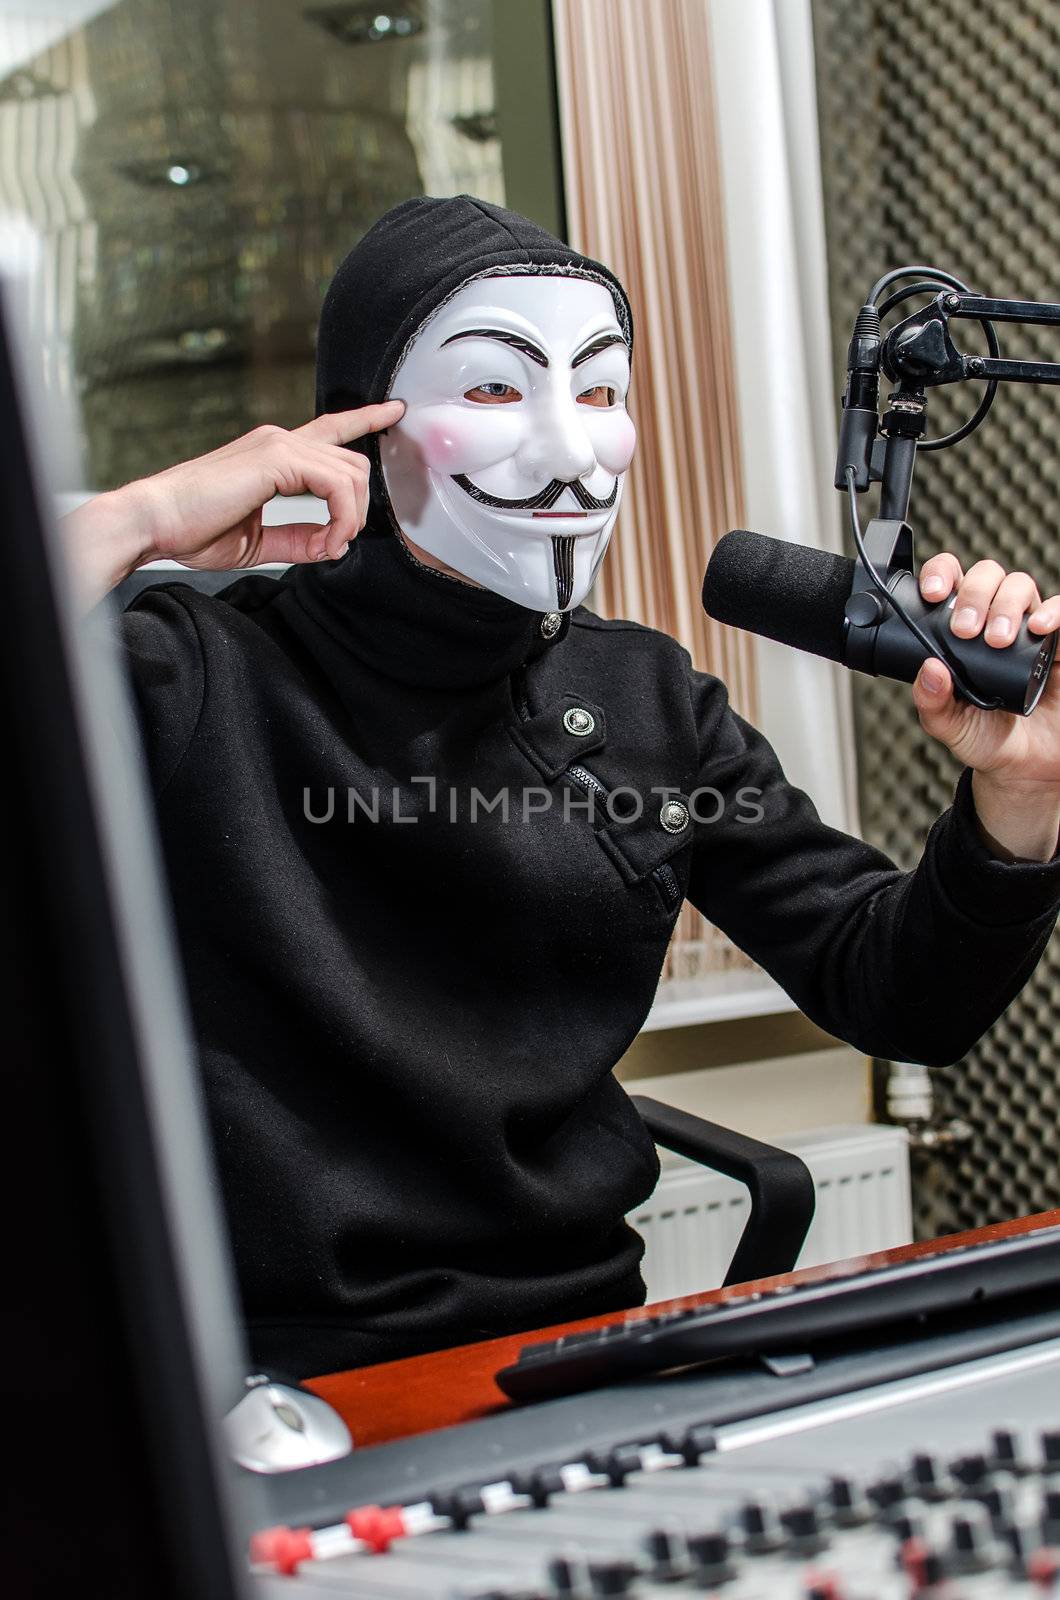 Antiglobalist expresses its demands on the radio